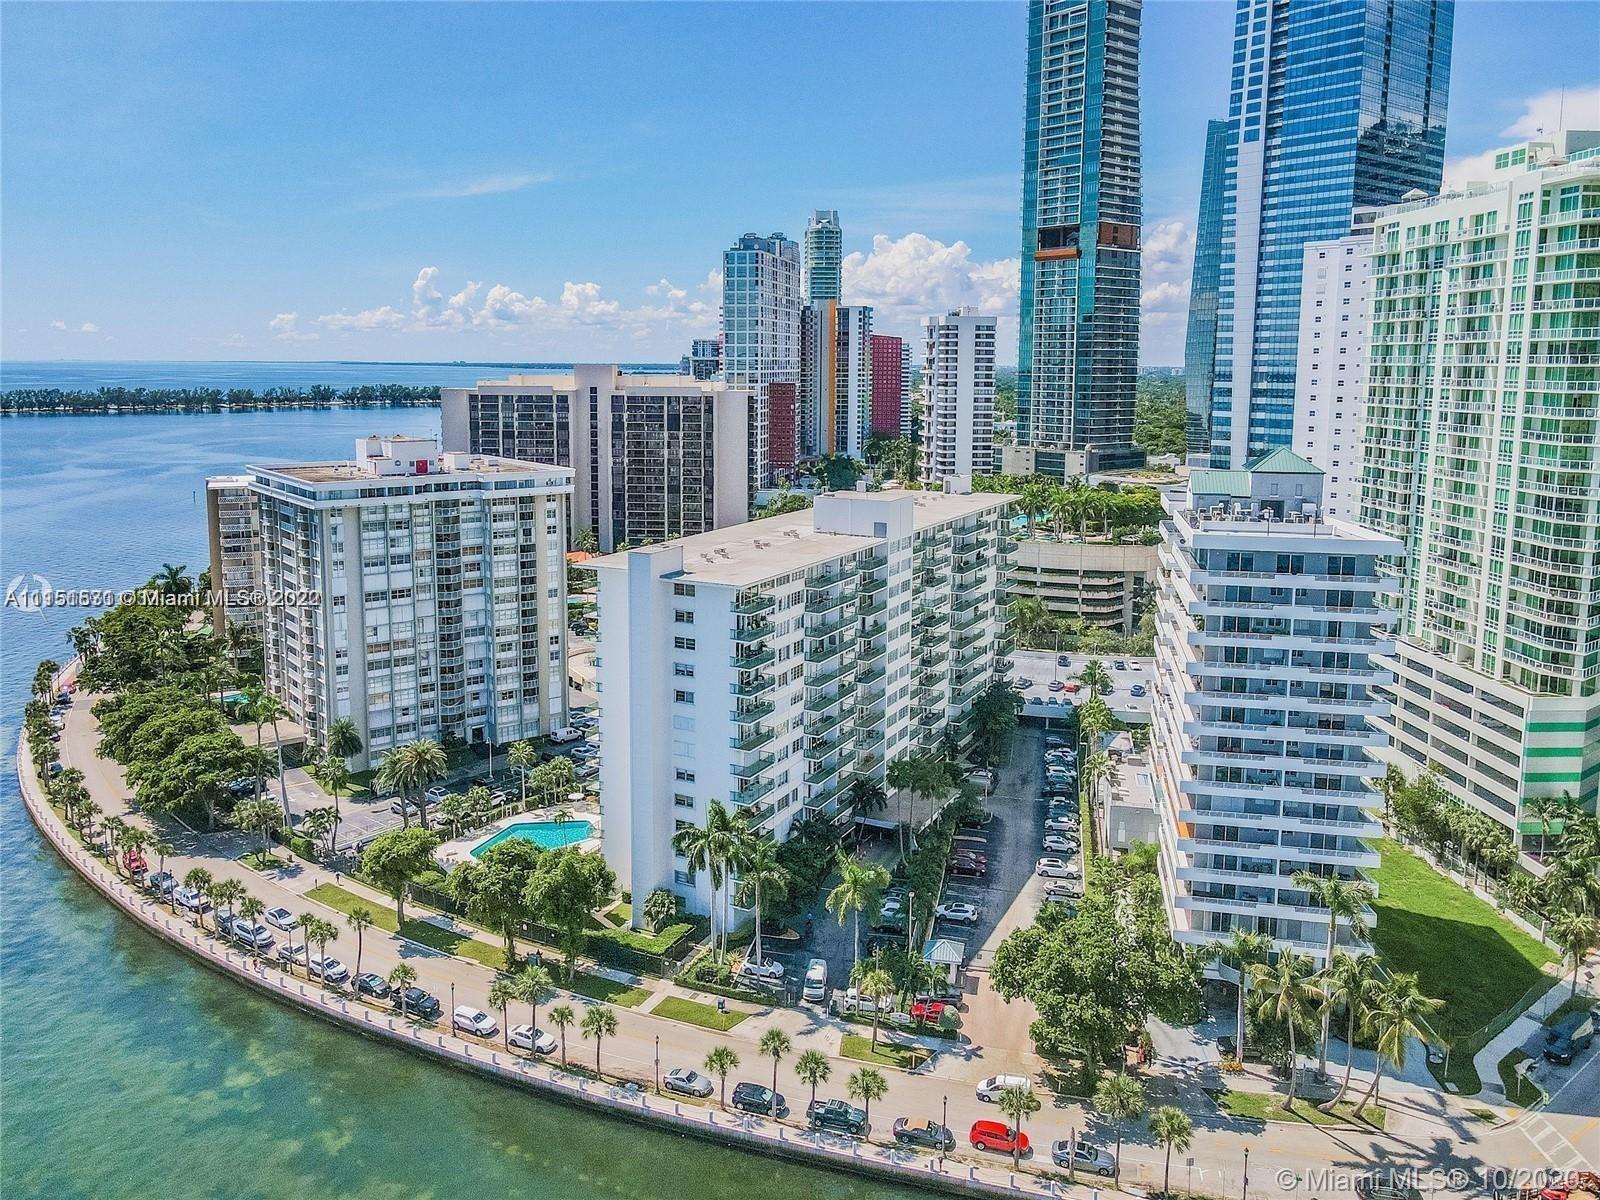 The only 1 bedroom unit available in Brickell Bay Tower. Spacious one bedroom unit in the heart of t